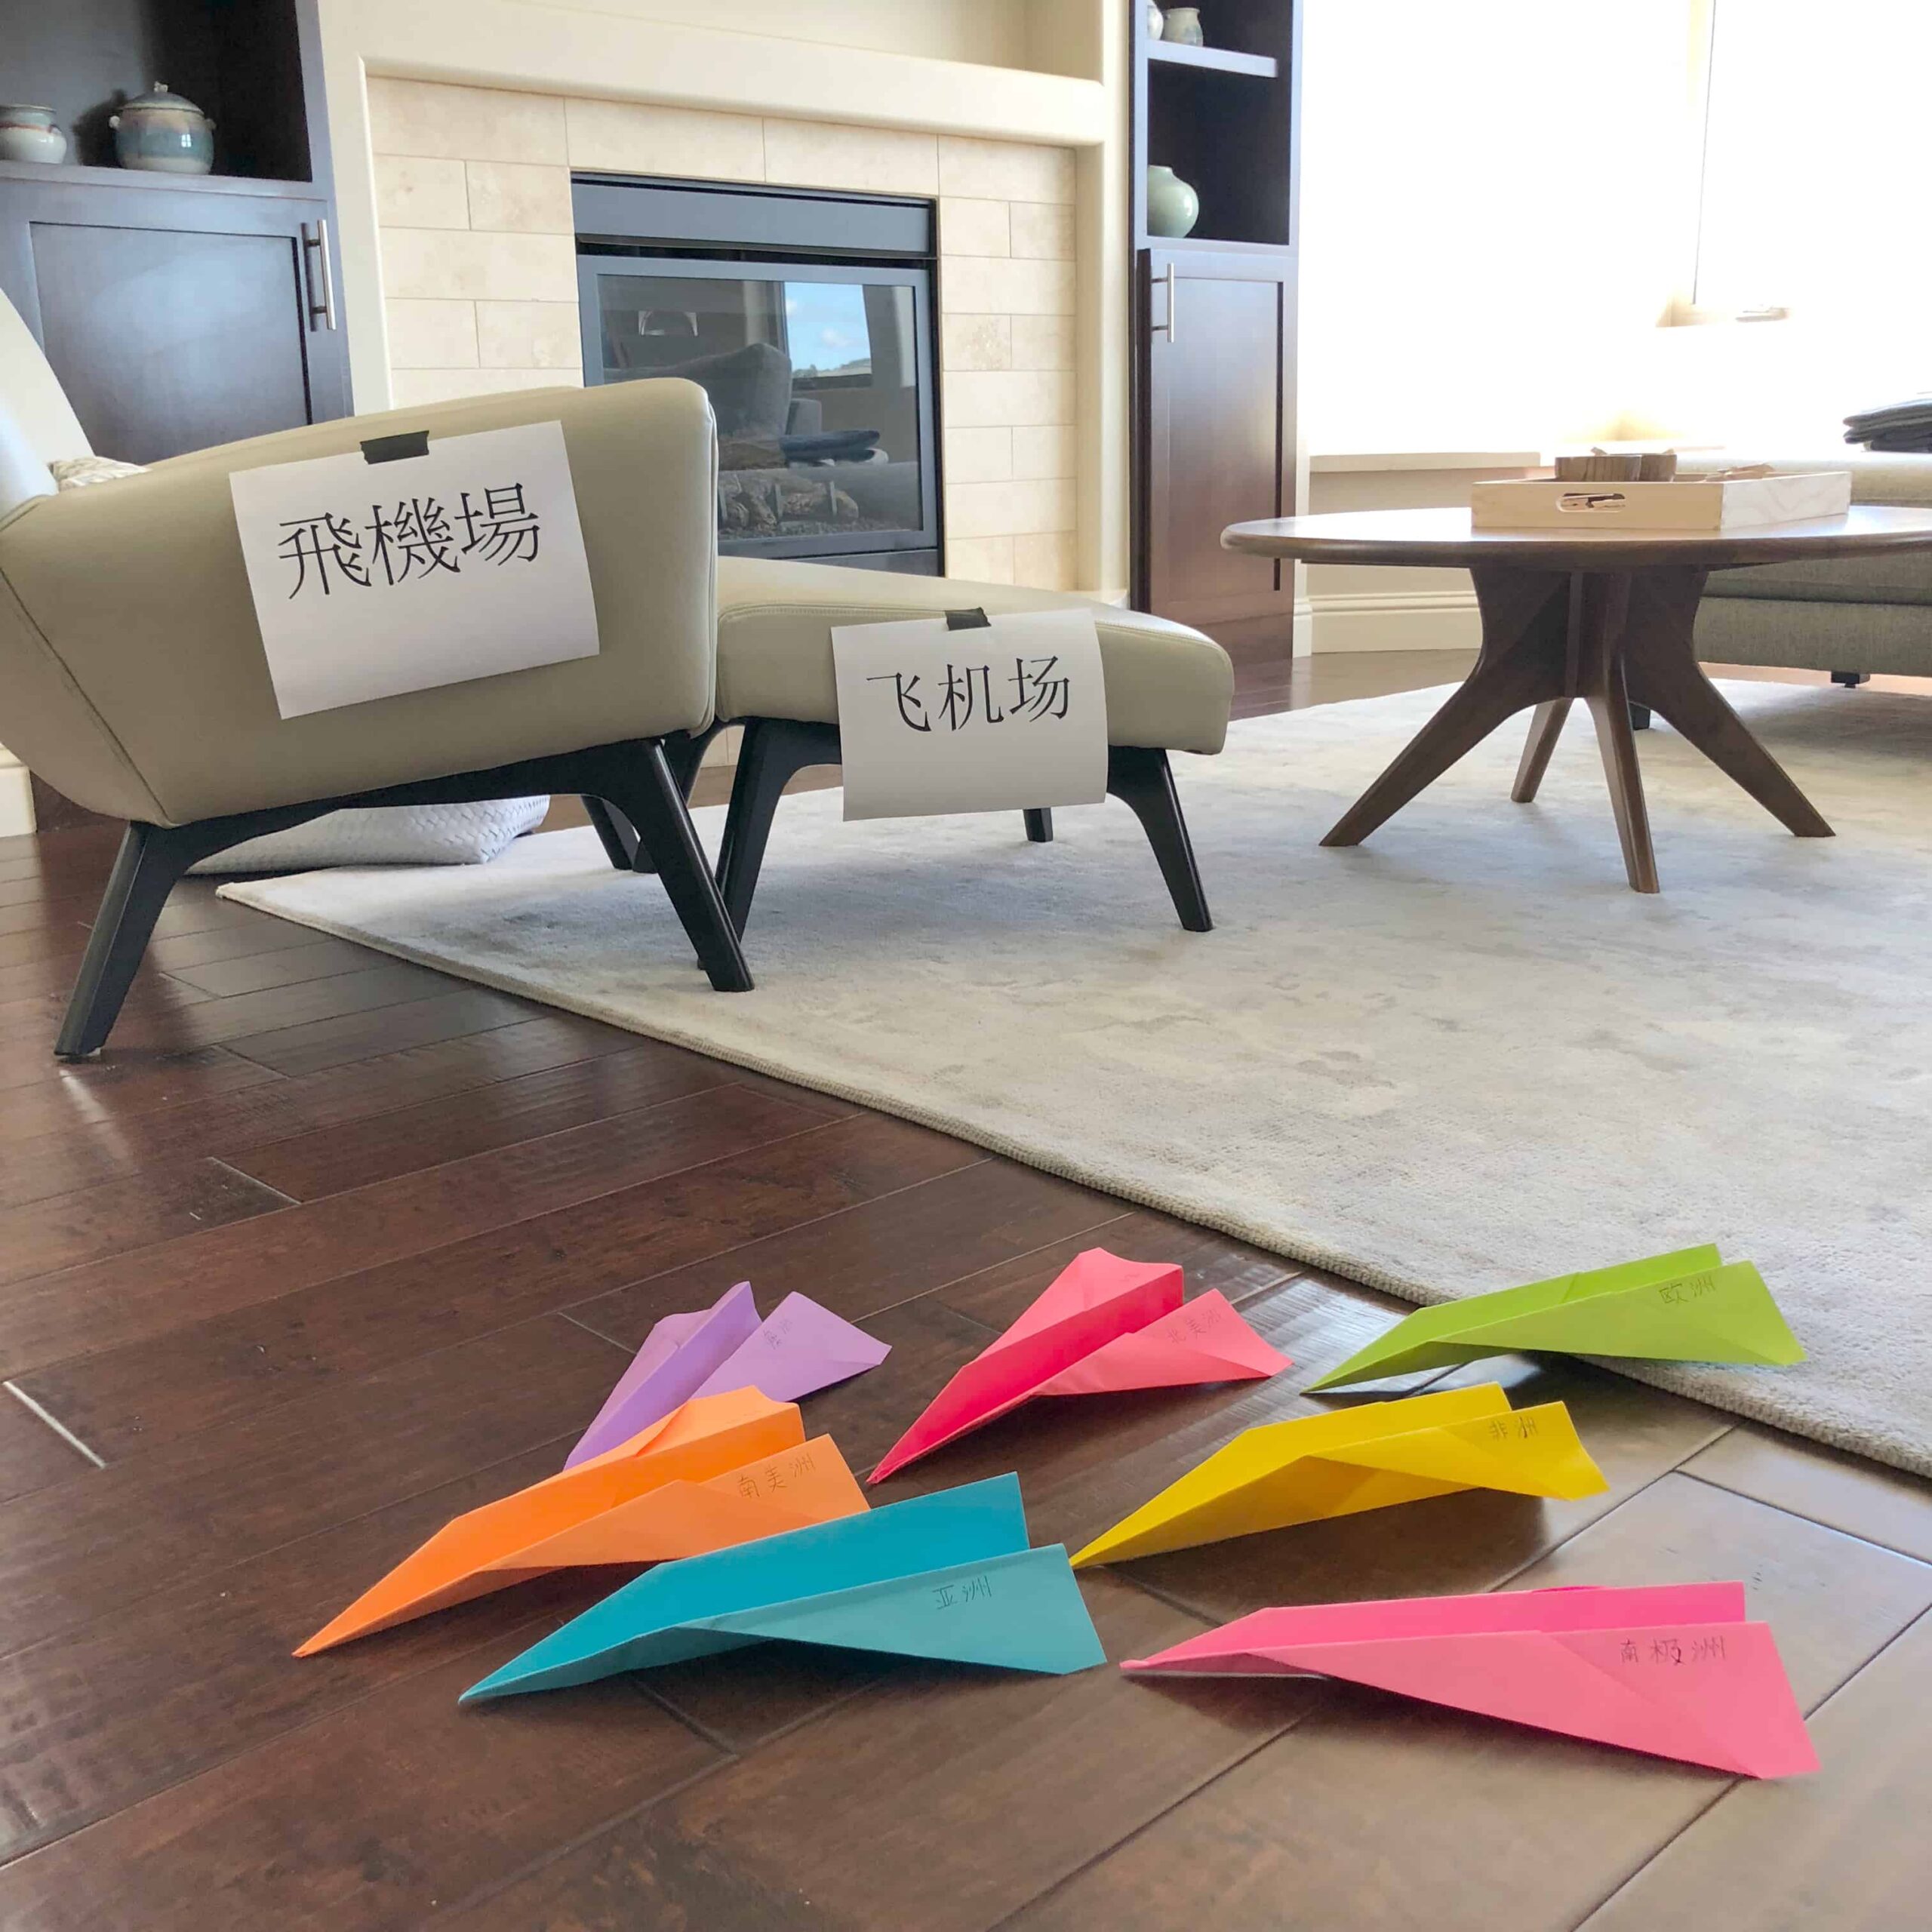 Paper Airplanes: Reading Practice Games for Kids!